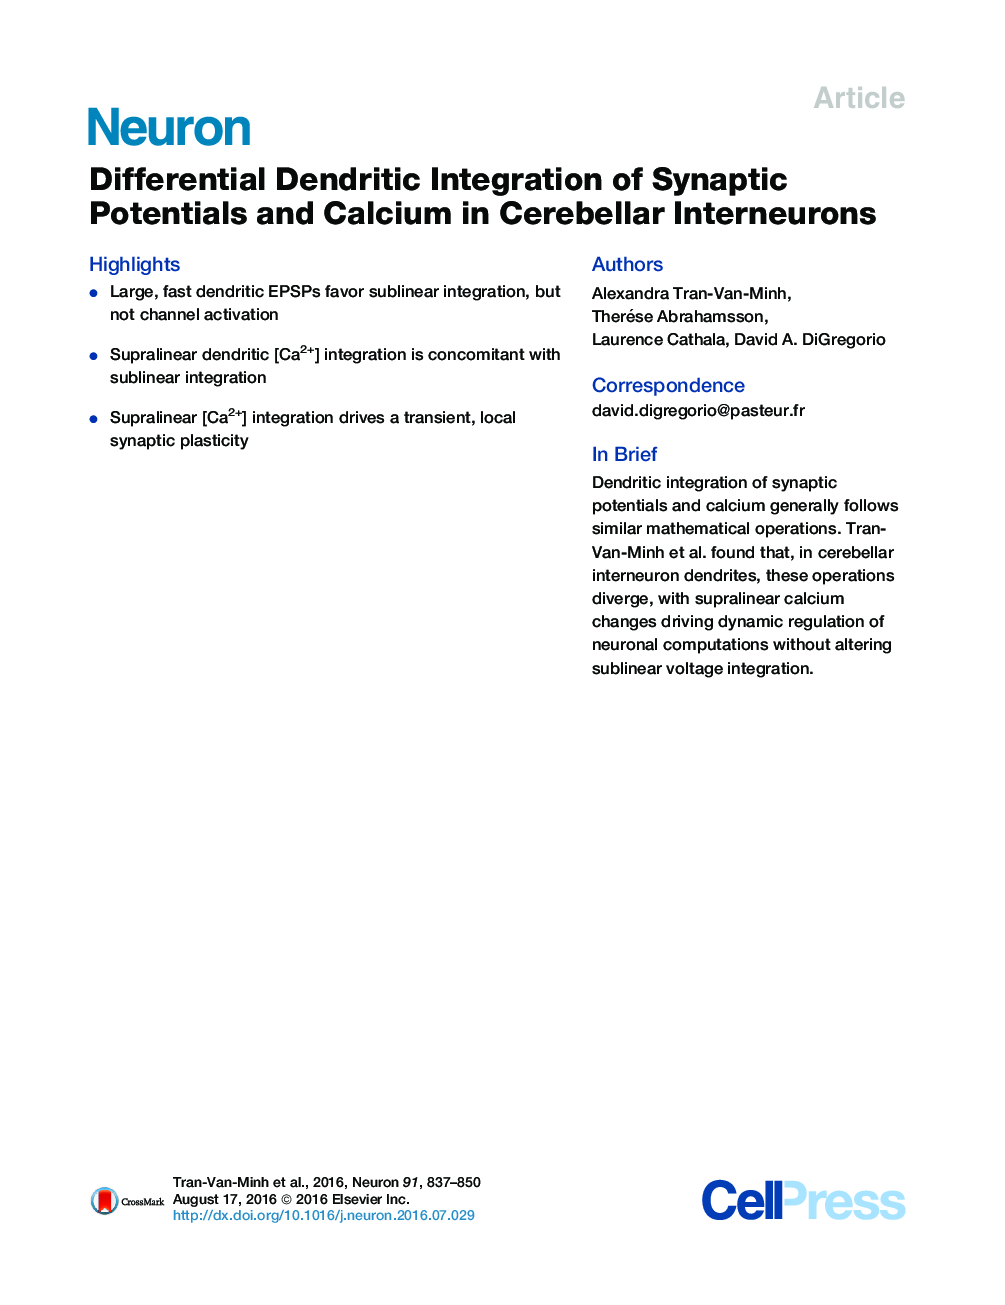 Differential Dendritic Integration of Synaptic Potentials and Calcium in Cerebellar Interneurons